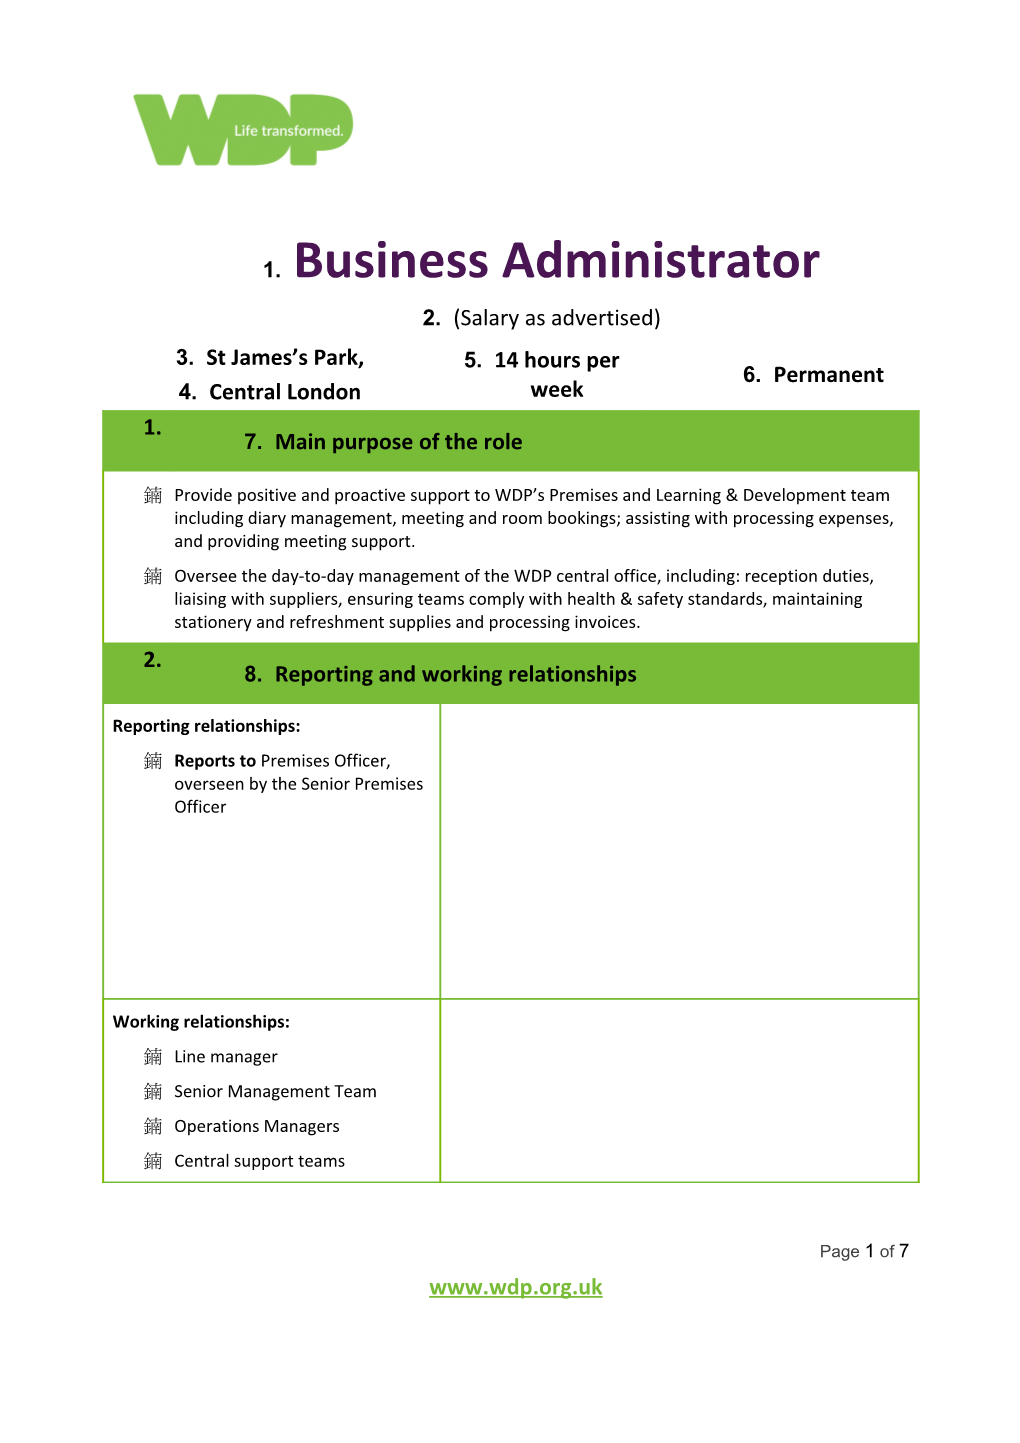 Business Administrator